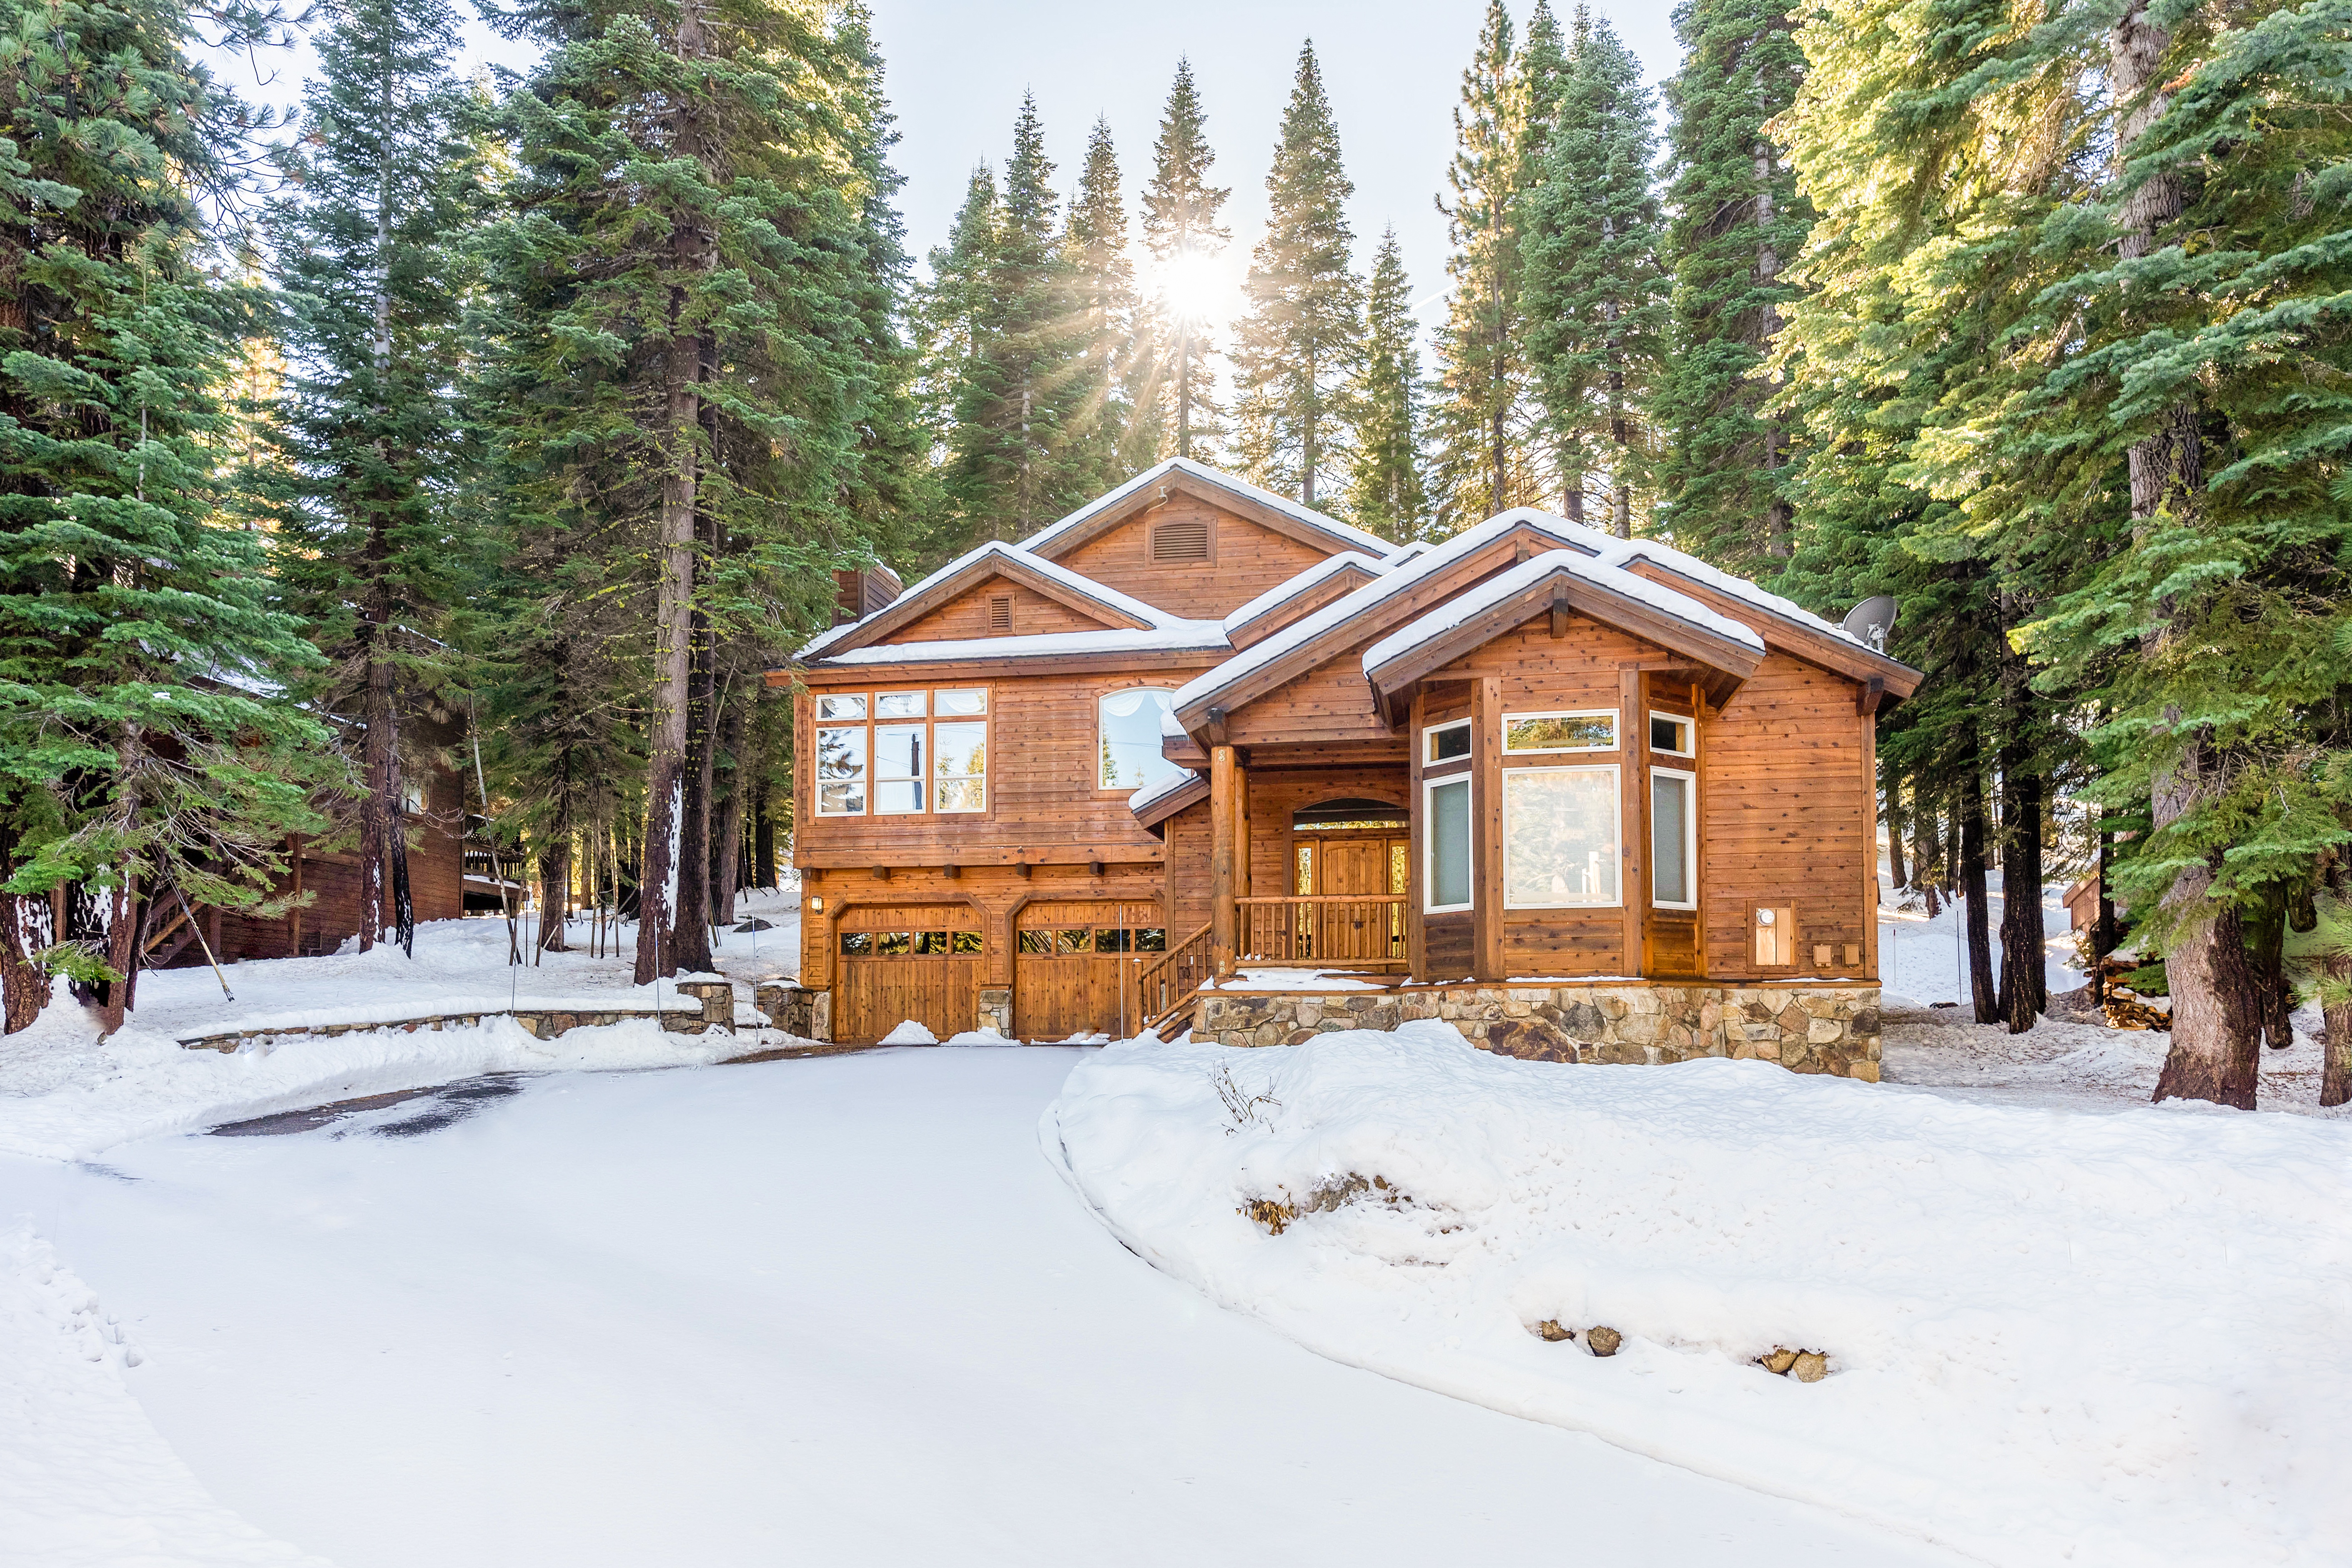 Truckee-based RedAwning vacation rental owners and managers saw an 88% booking increase YOY in 2019